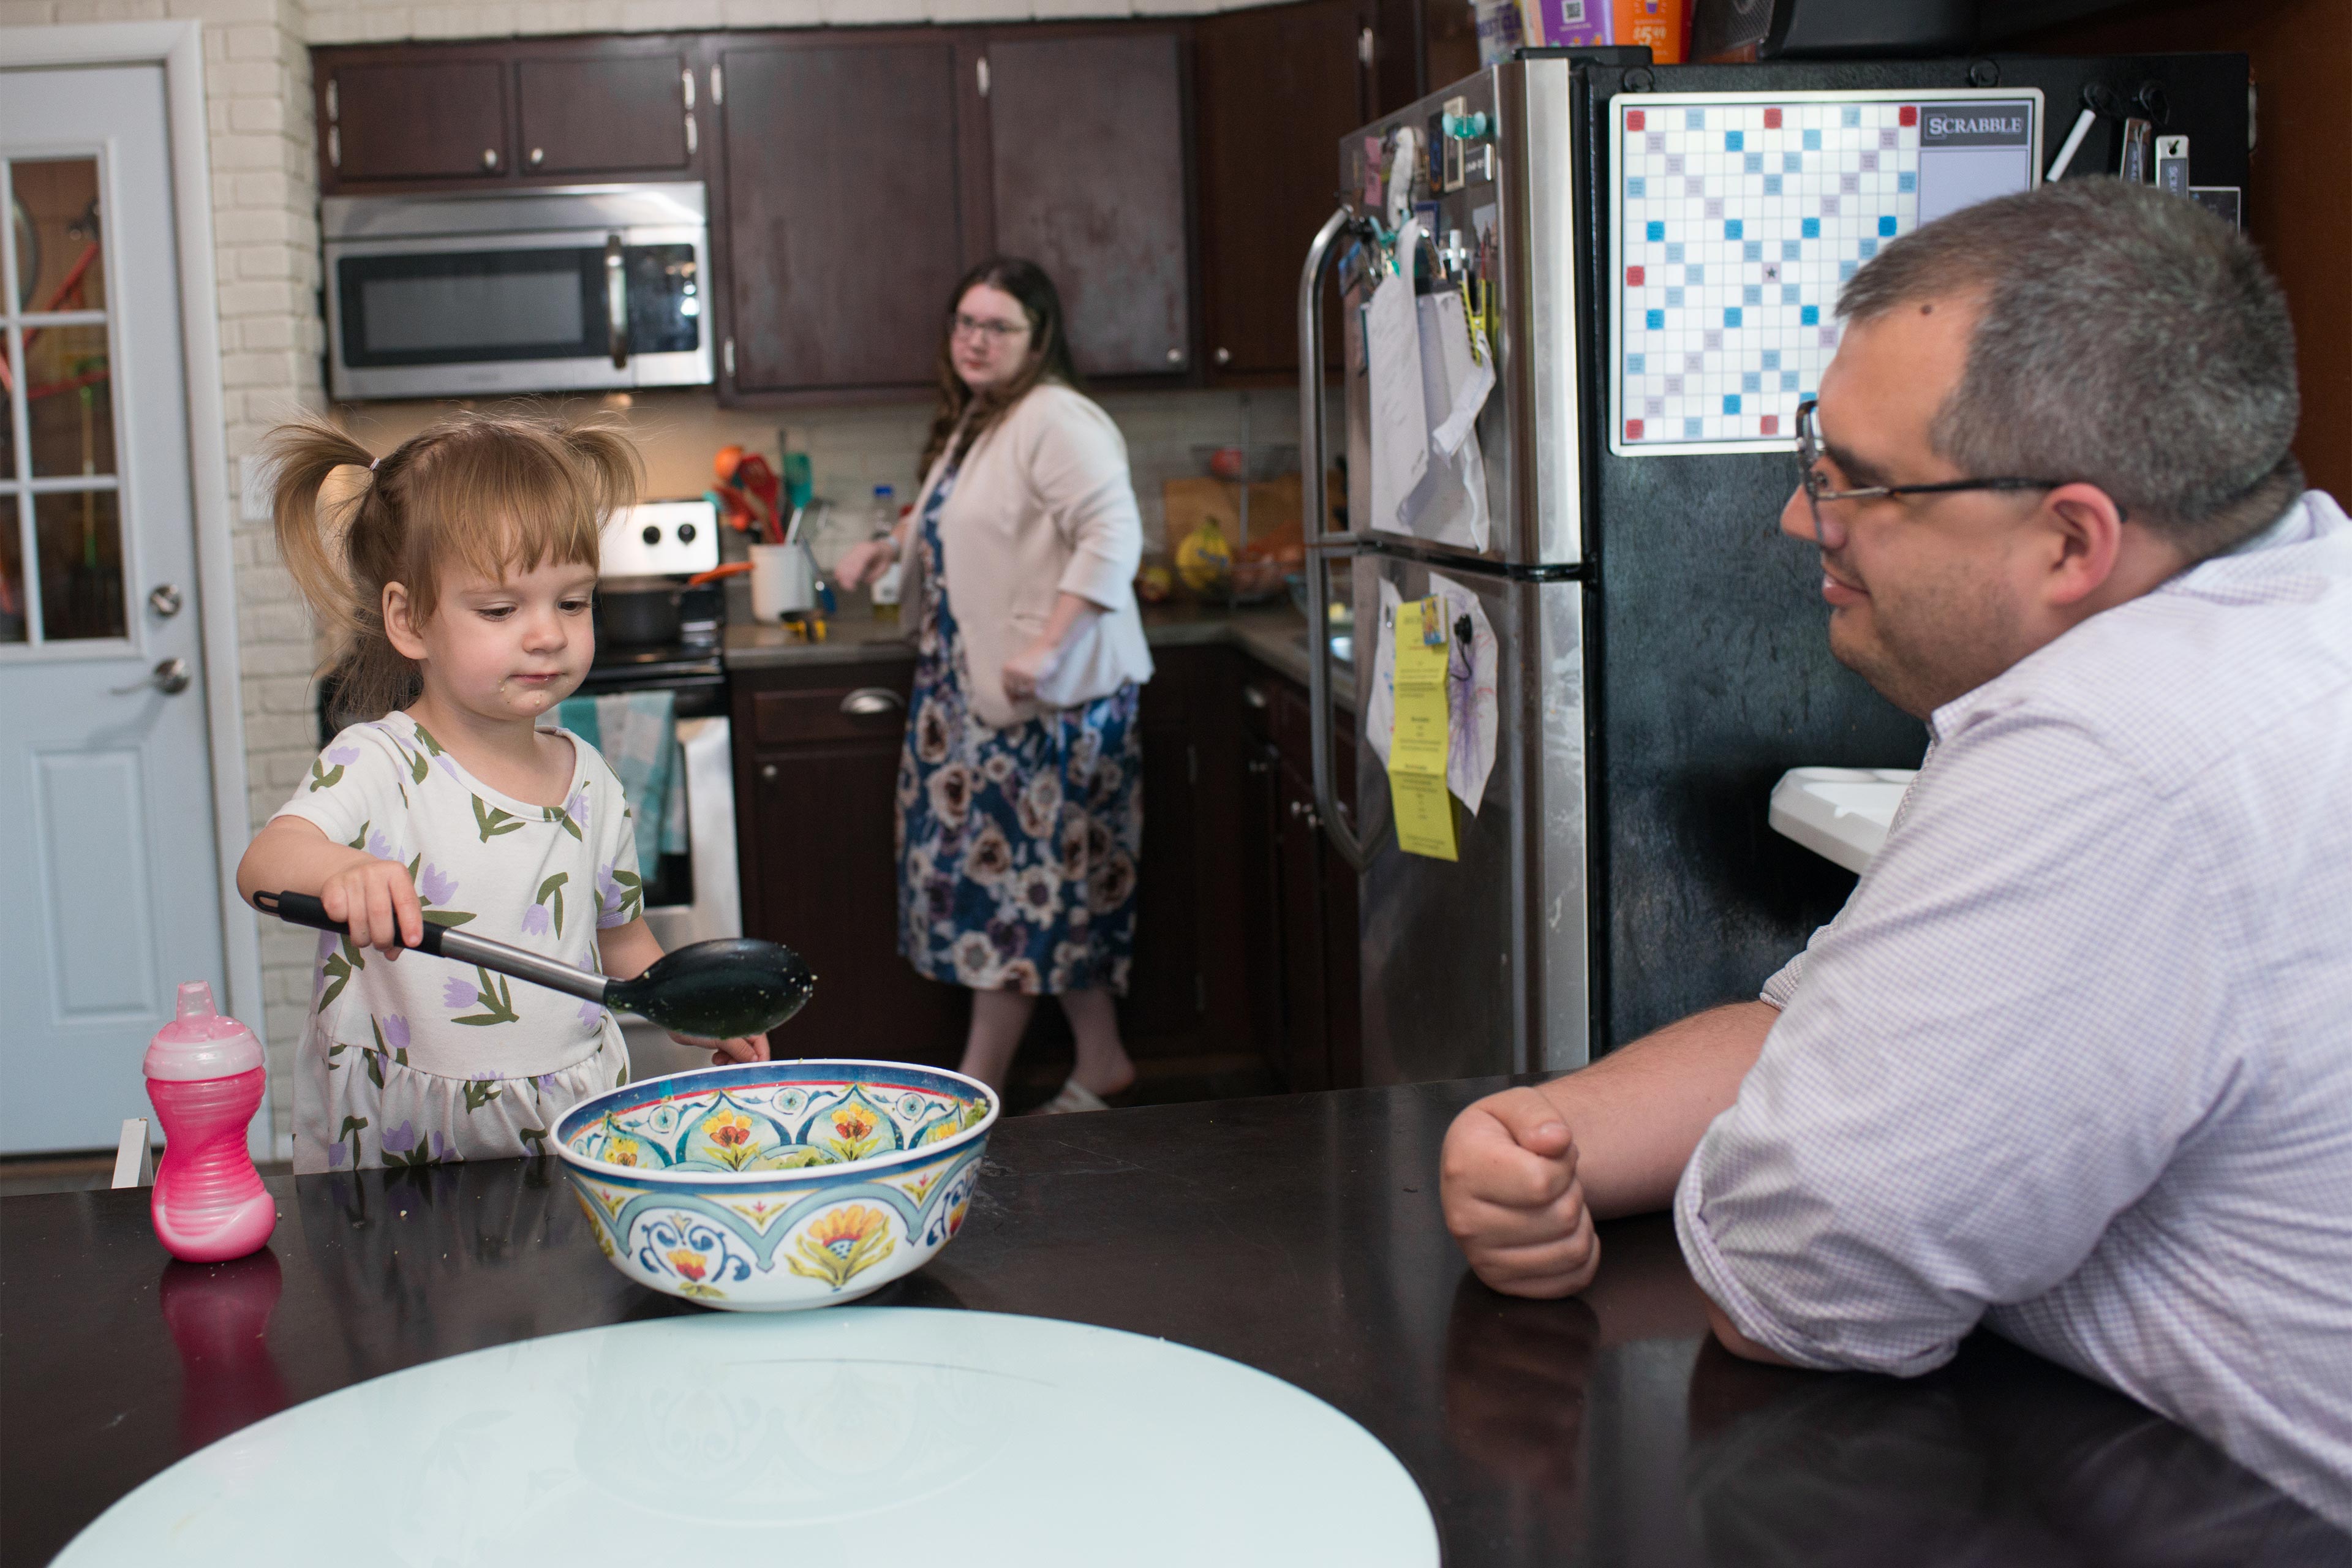 A photo of a young girl with a large spoon and bowl sitting next to her father. Her mother is in the kitchen behind them.